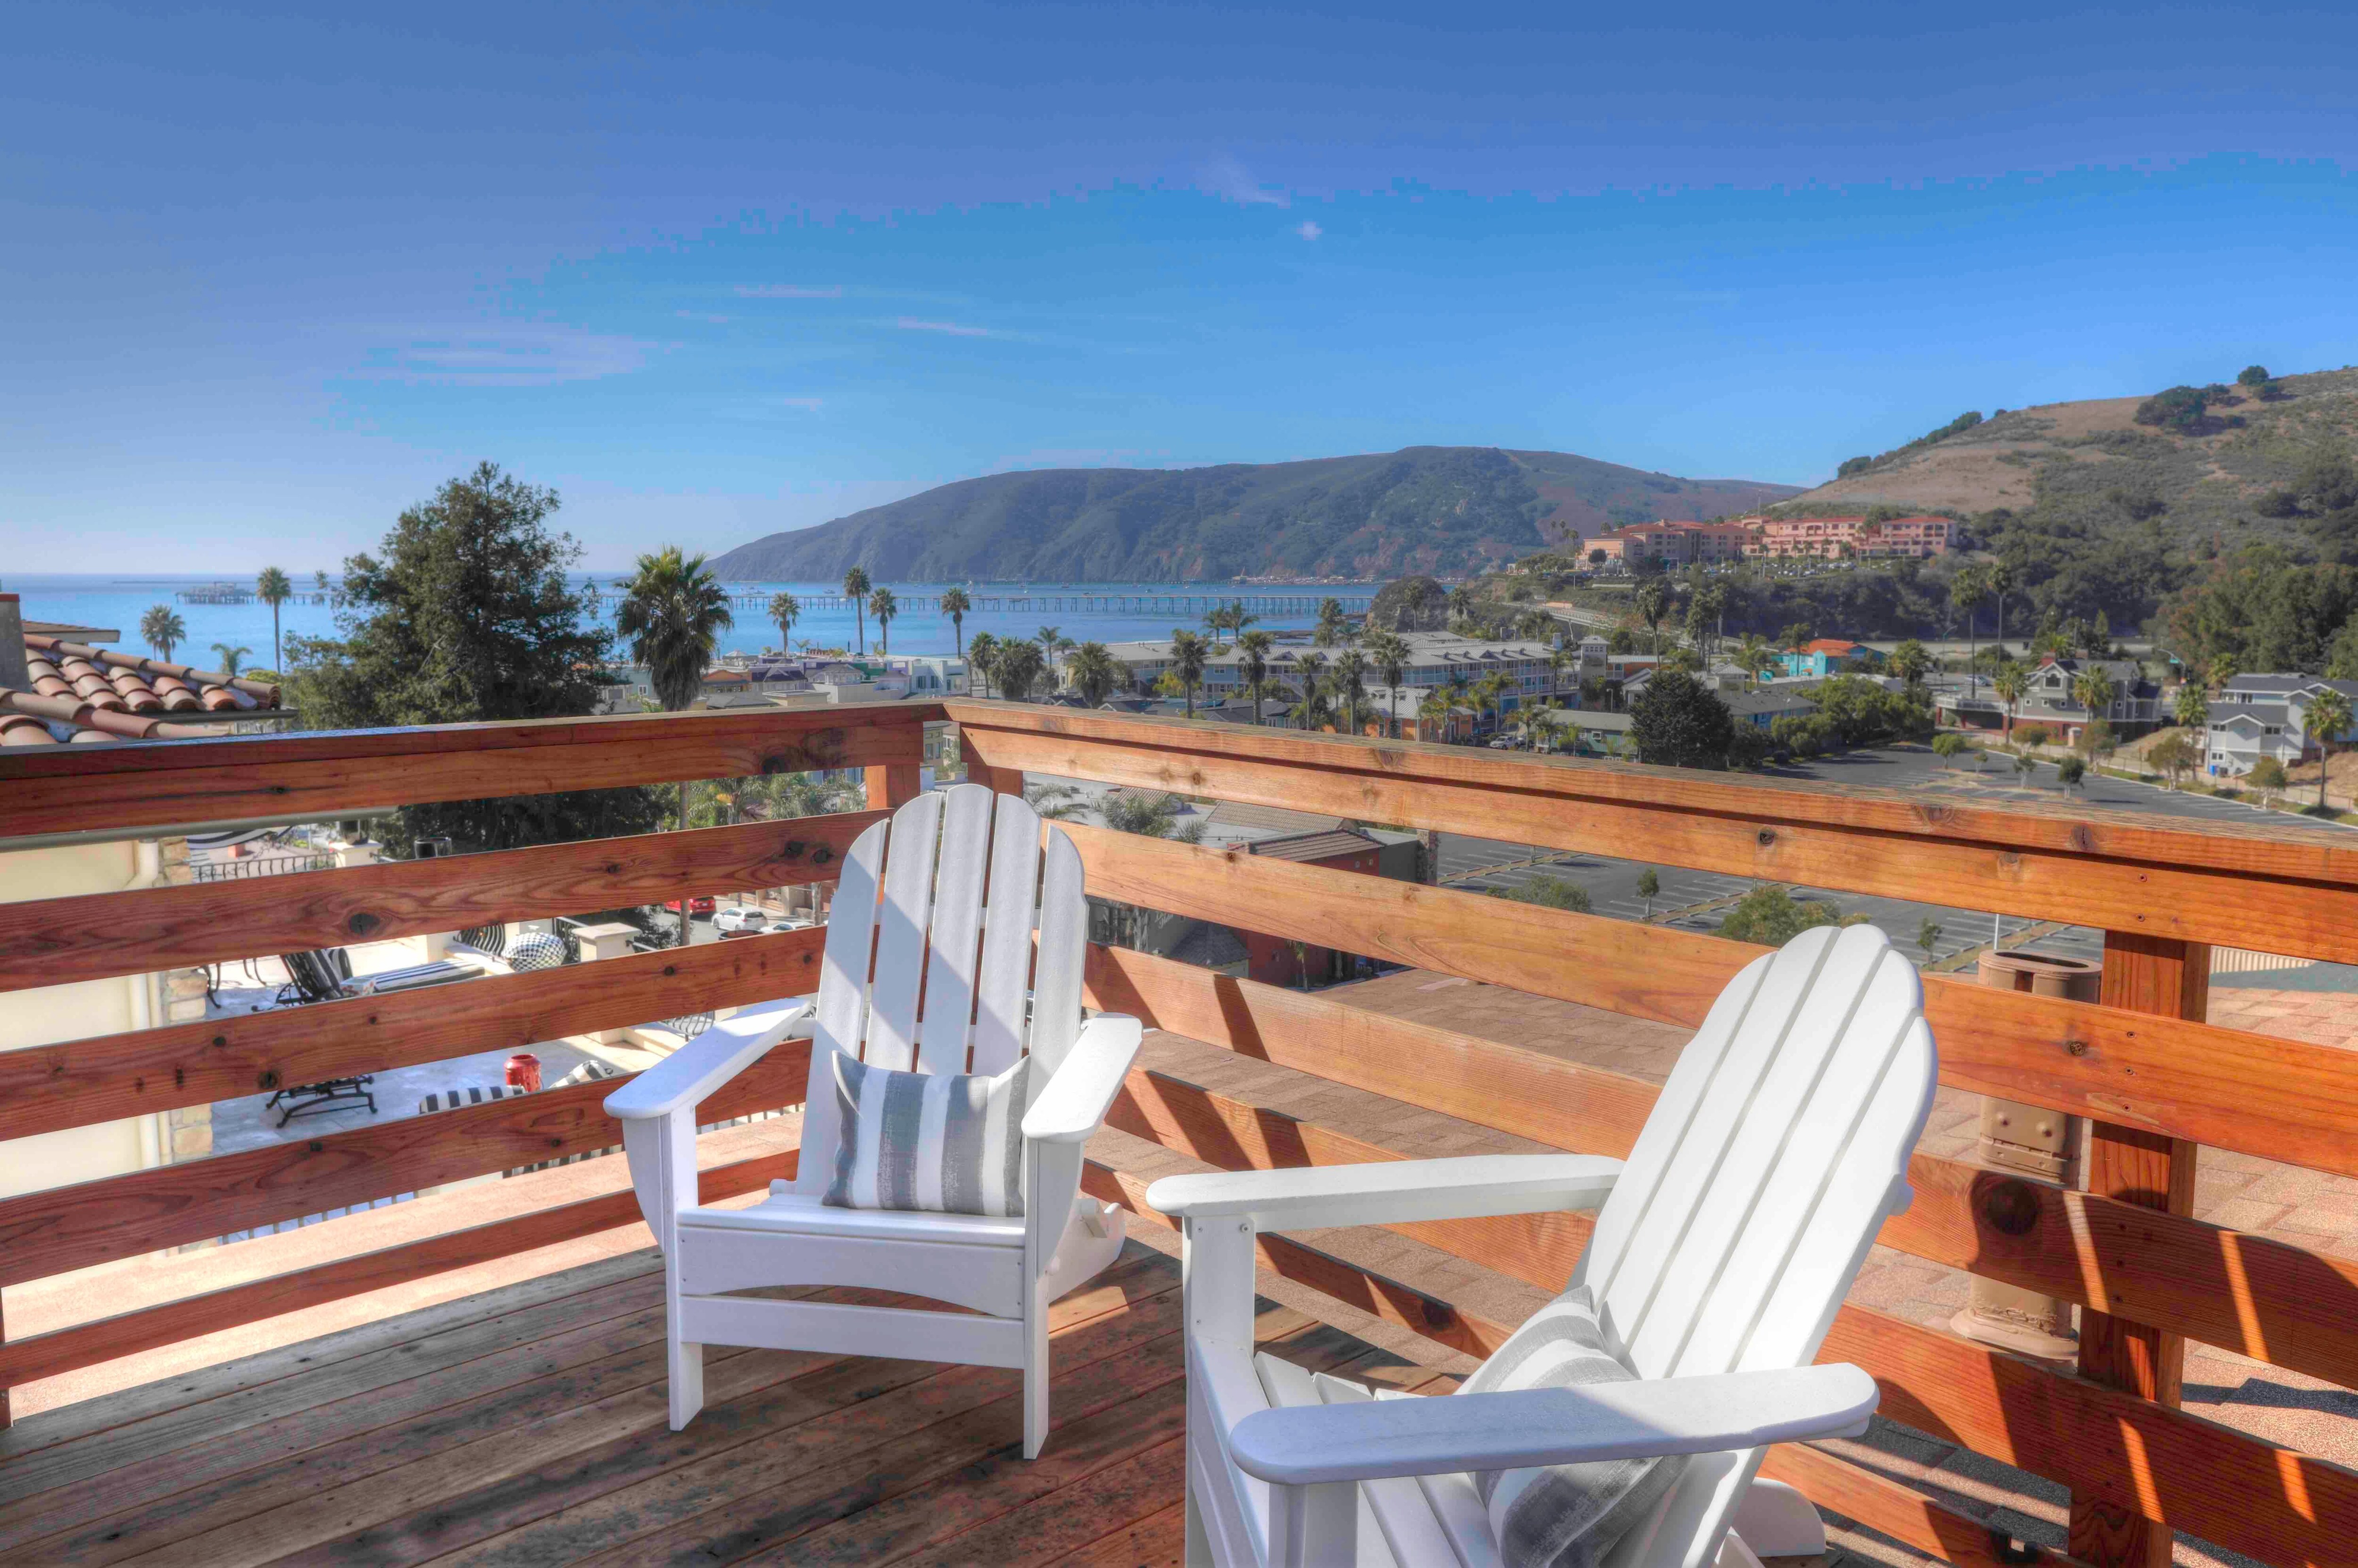 Big Avila Beach views from the deck. Entry to the deck is from the living room or master bedroom.